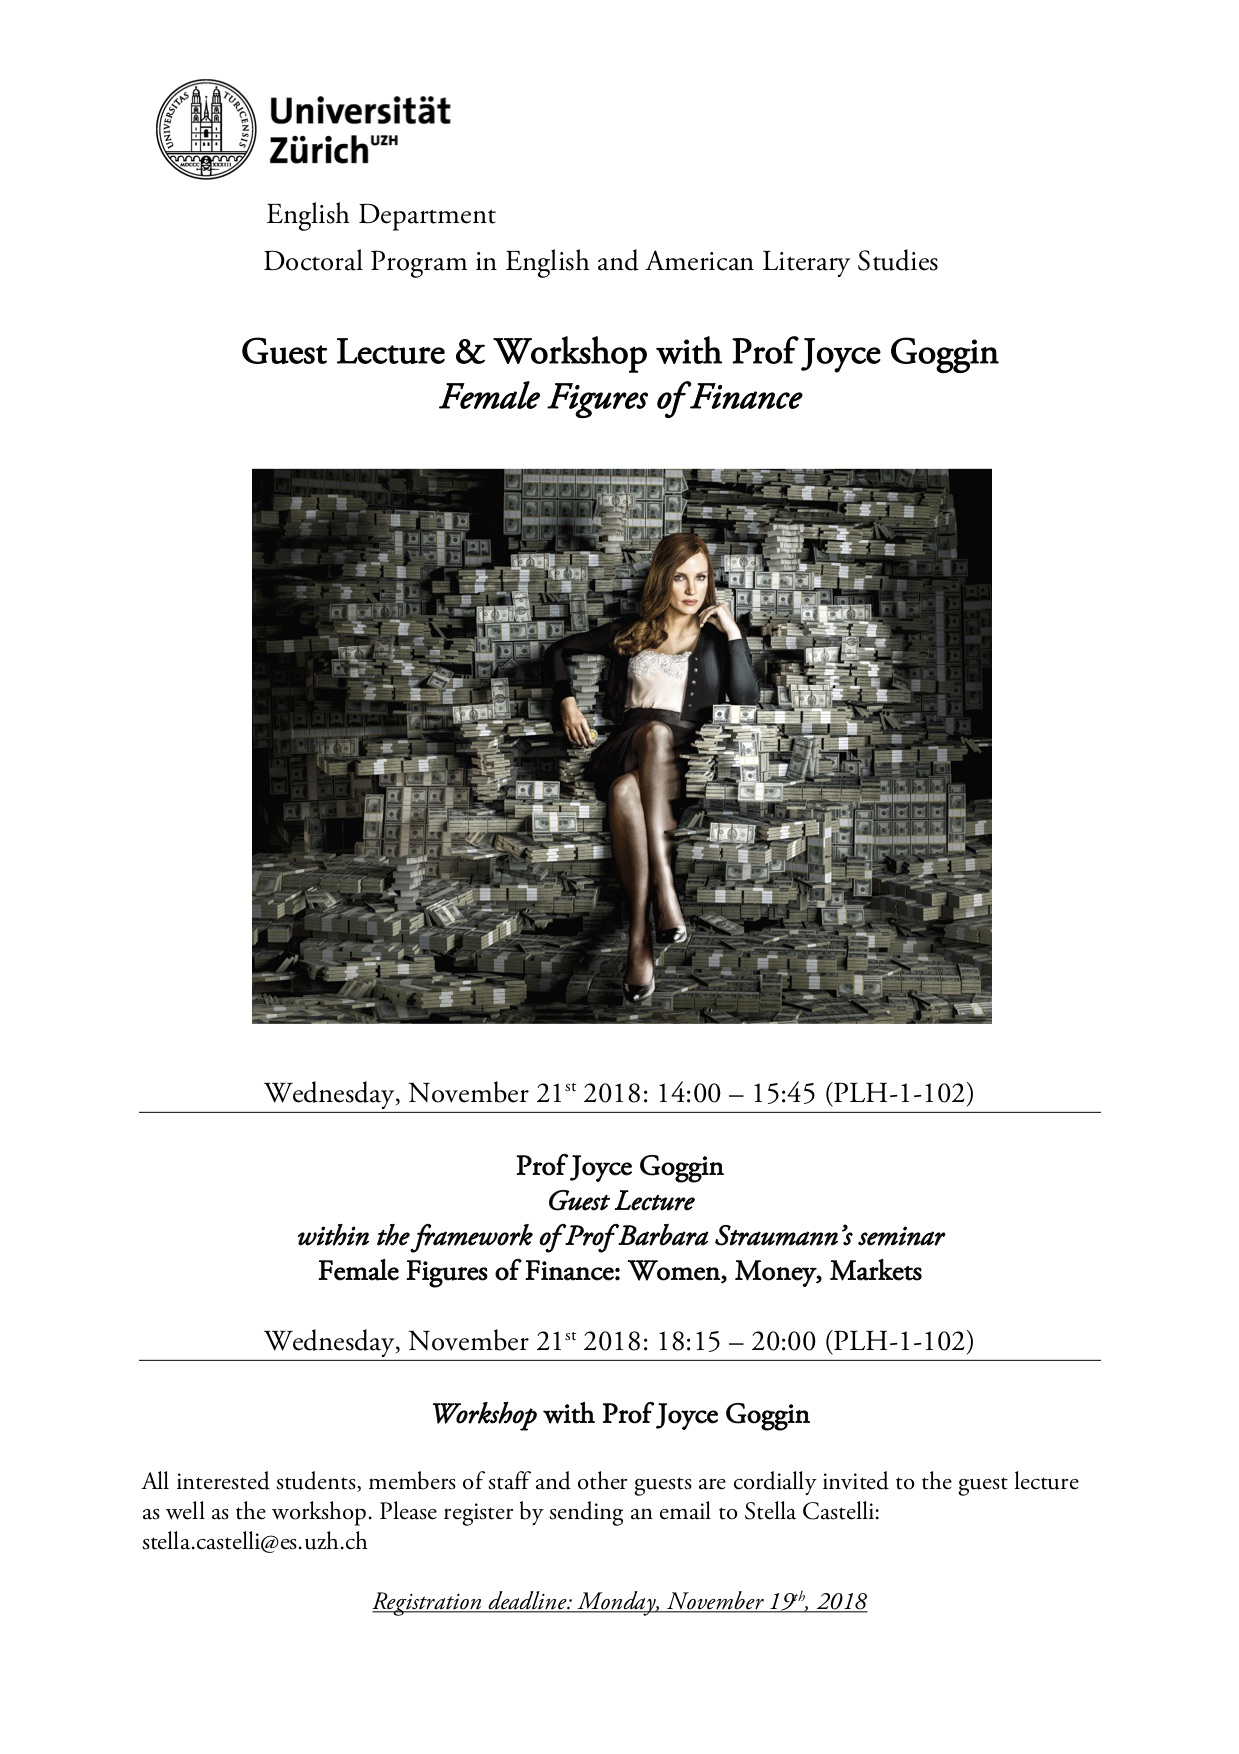  Guest Lecture & Workshop with Prof Joyce Goggin